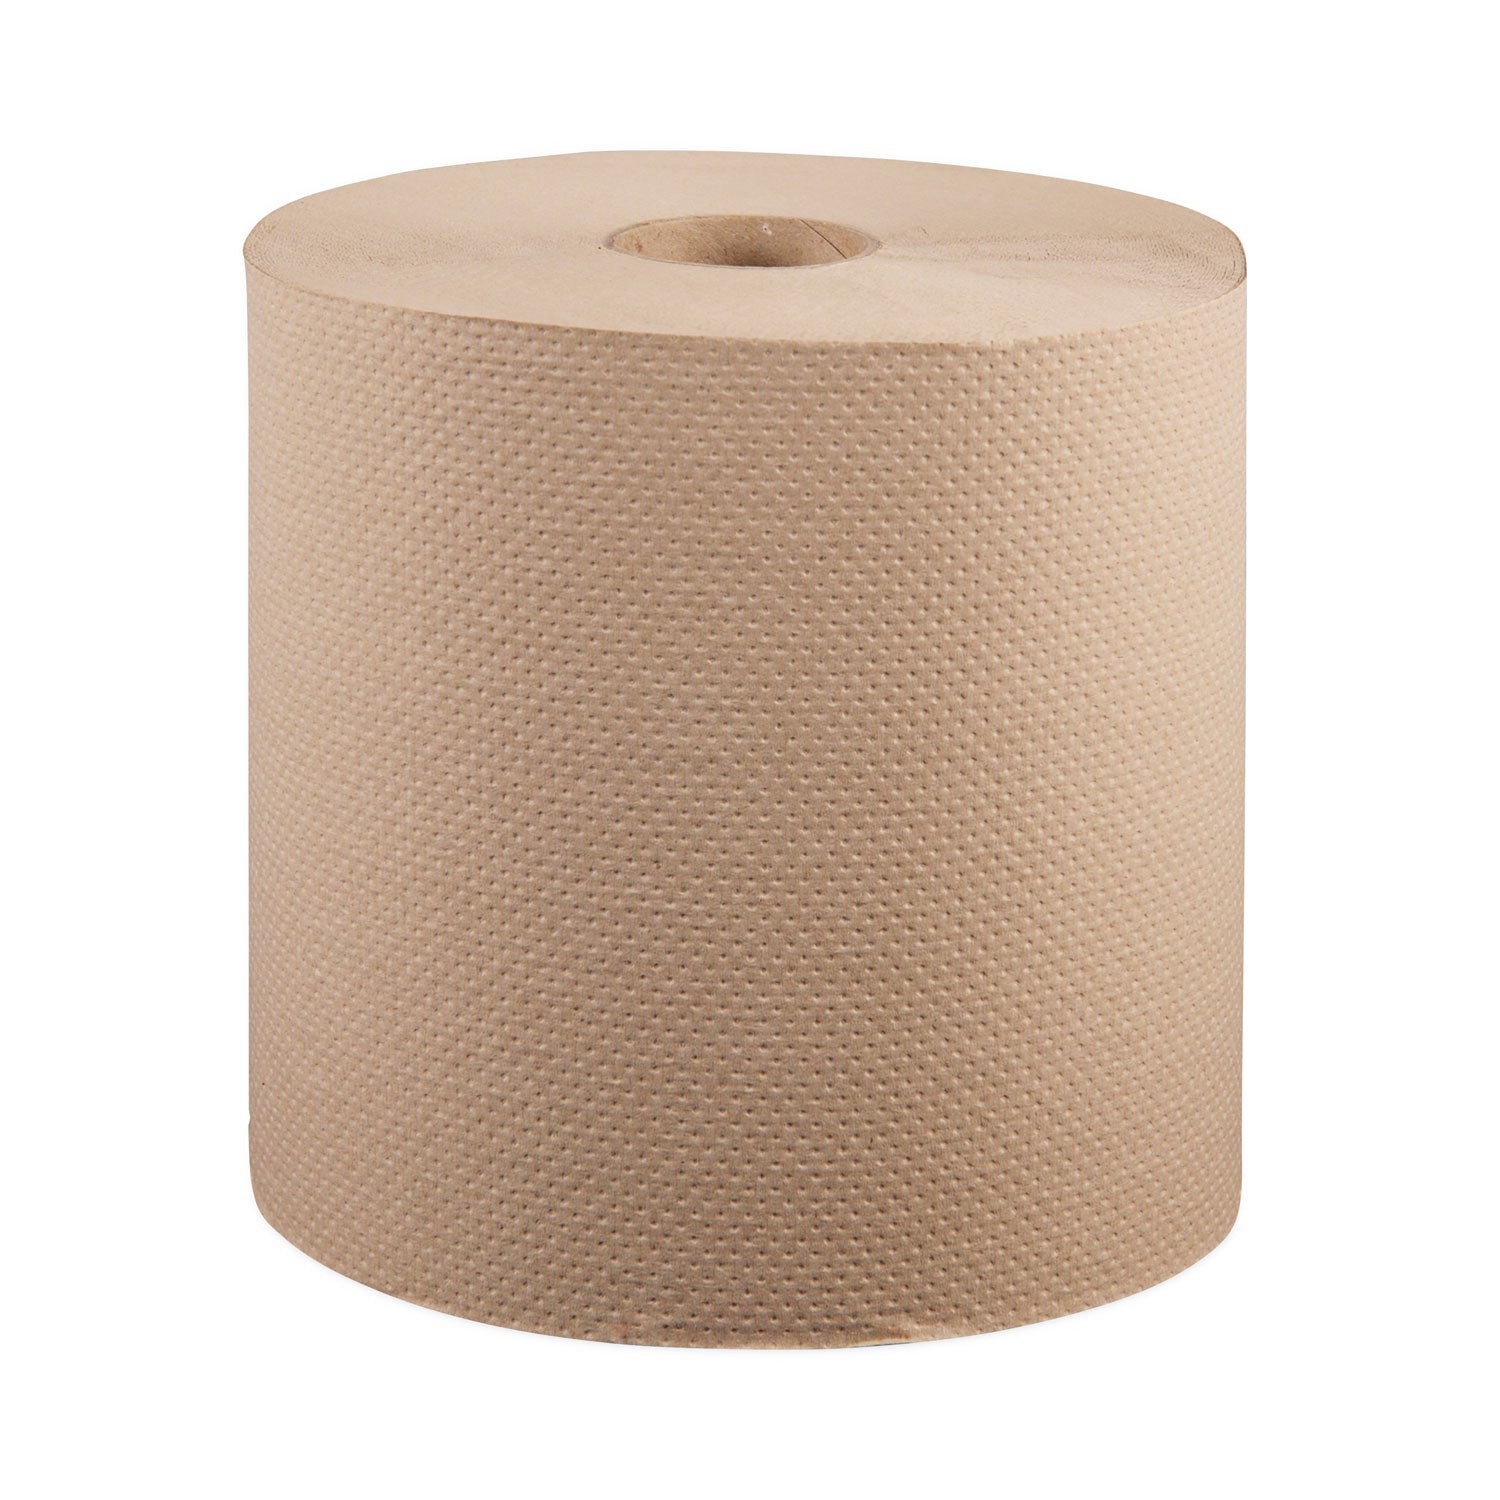 Hardwound Roll Towels, 1-Ply, 8" x 800 ft, Natural, 6 Rolls/Carton - 